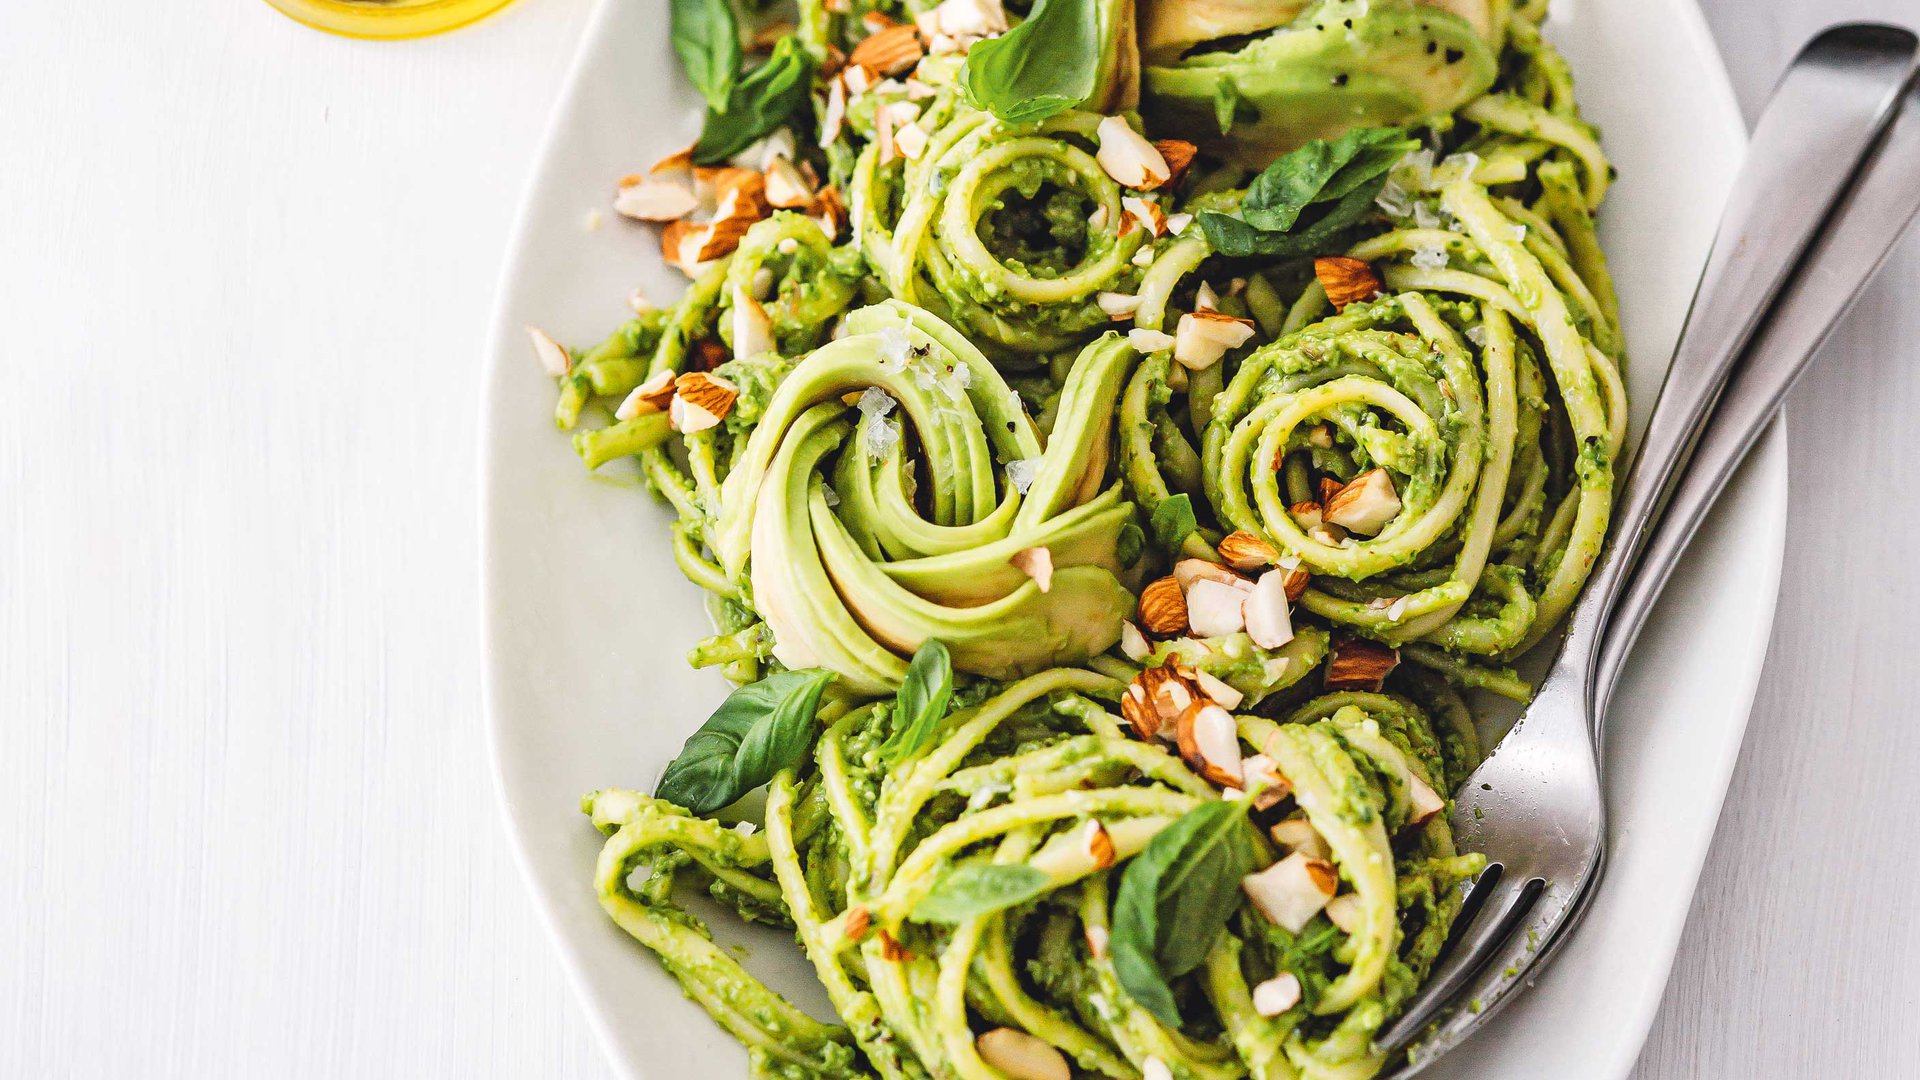 Spinach and avo pasta salad